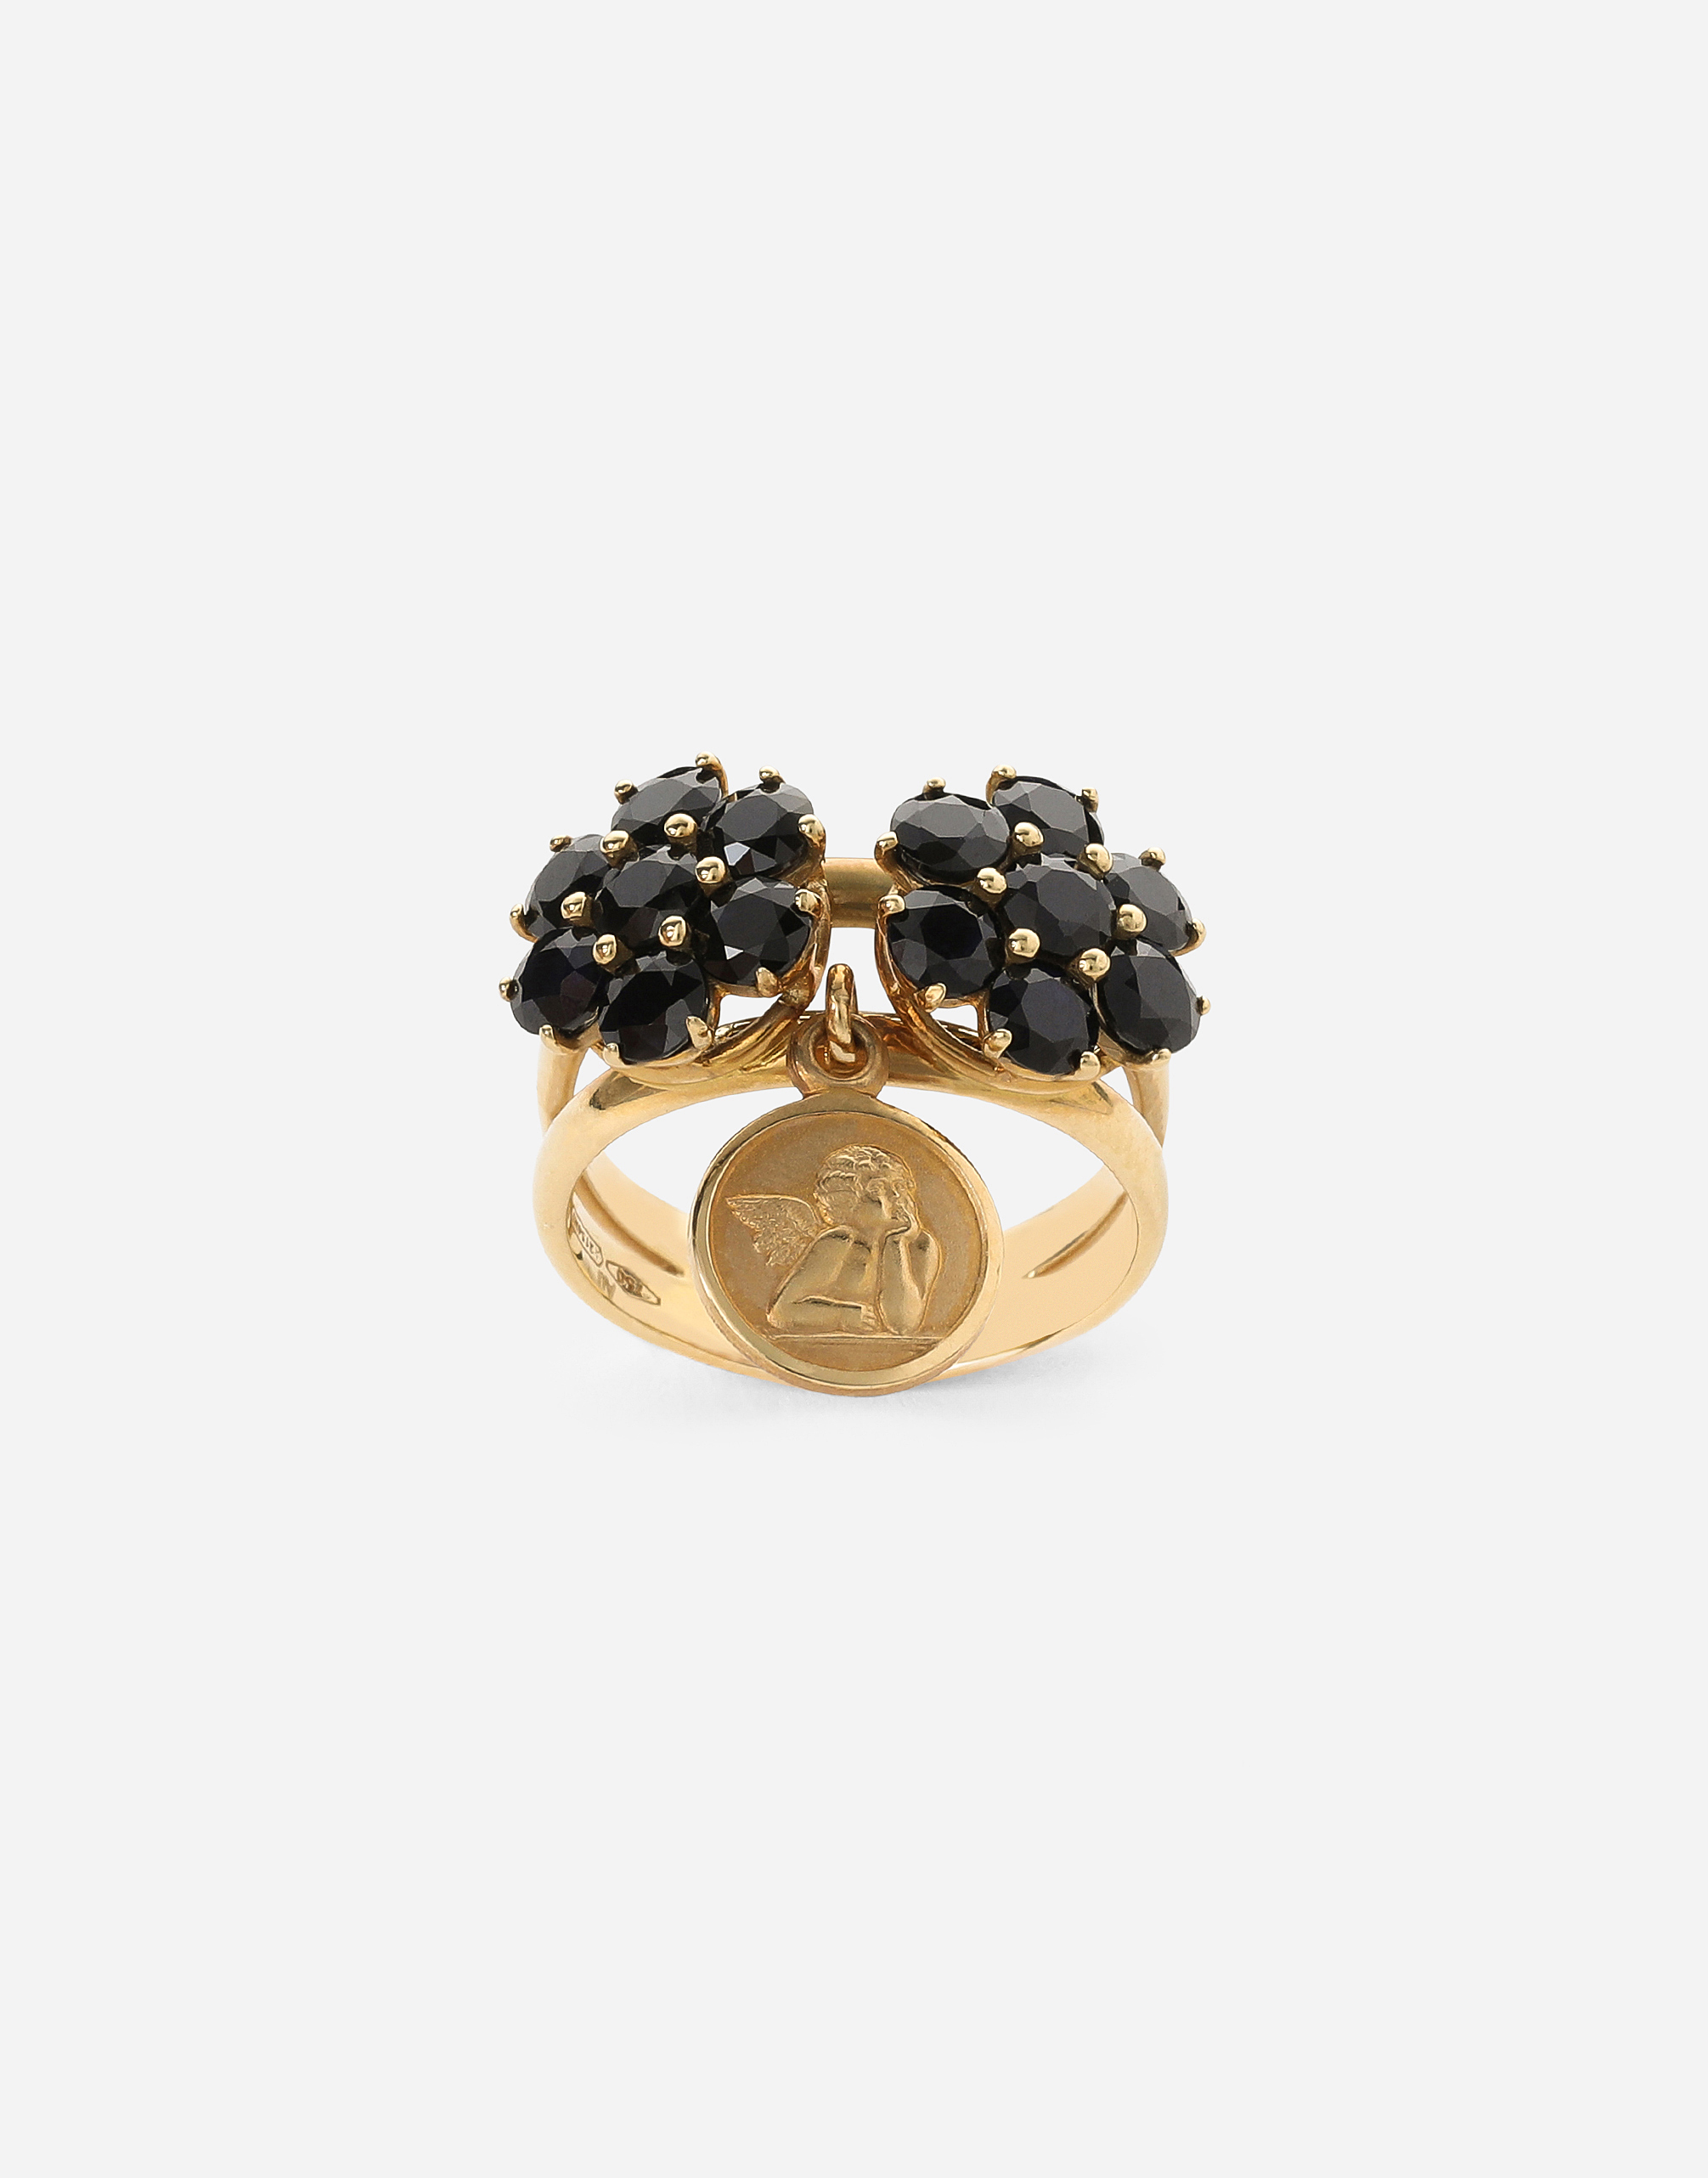 Family ring in yellow 18kt gold with black sapphires in Gold